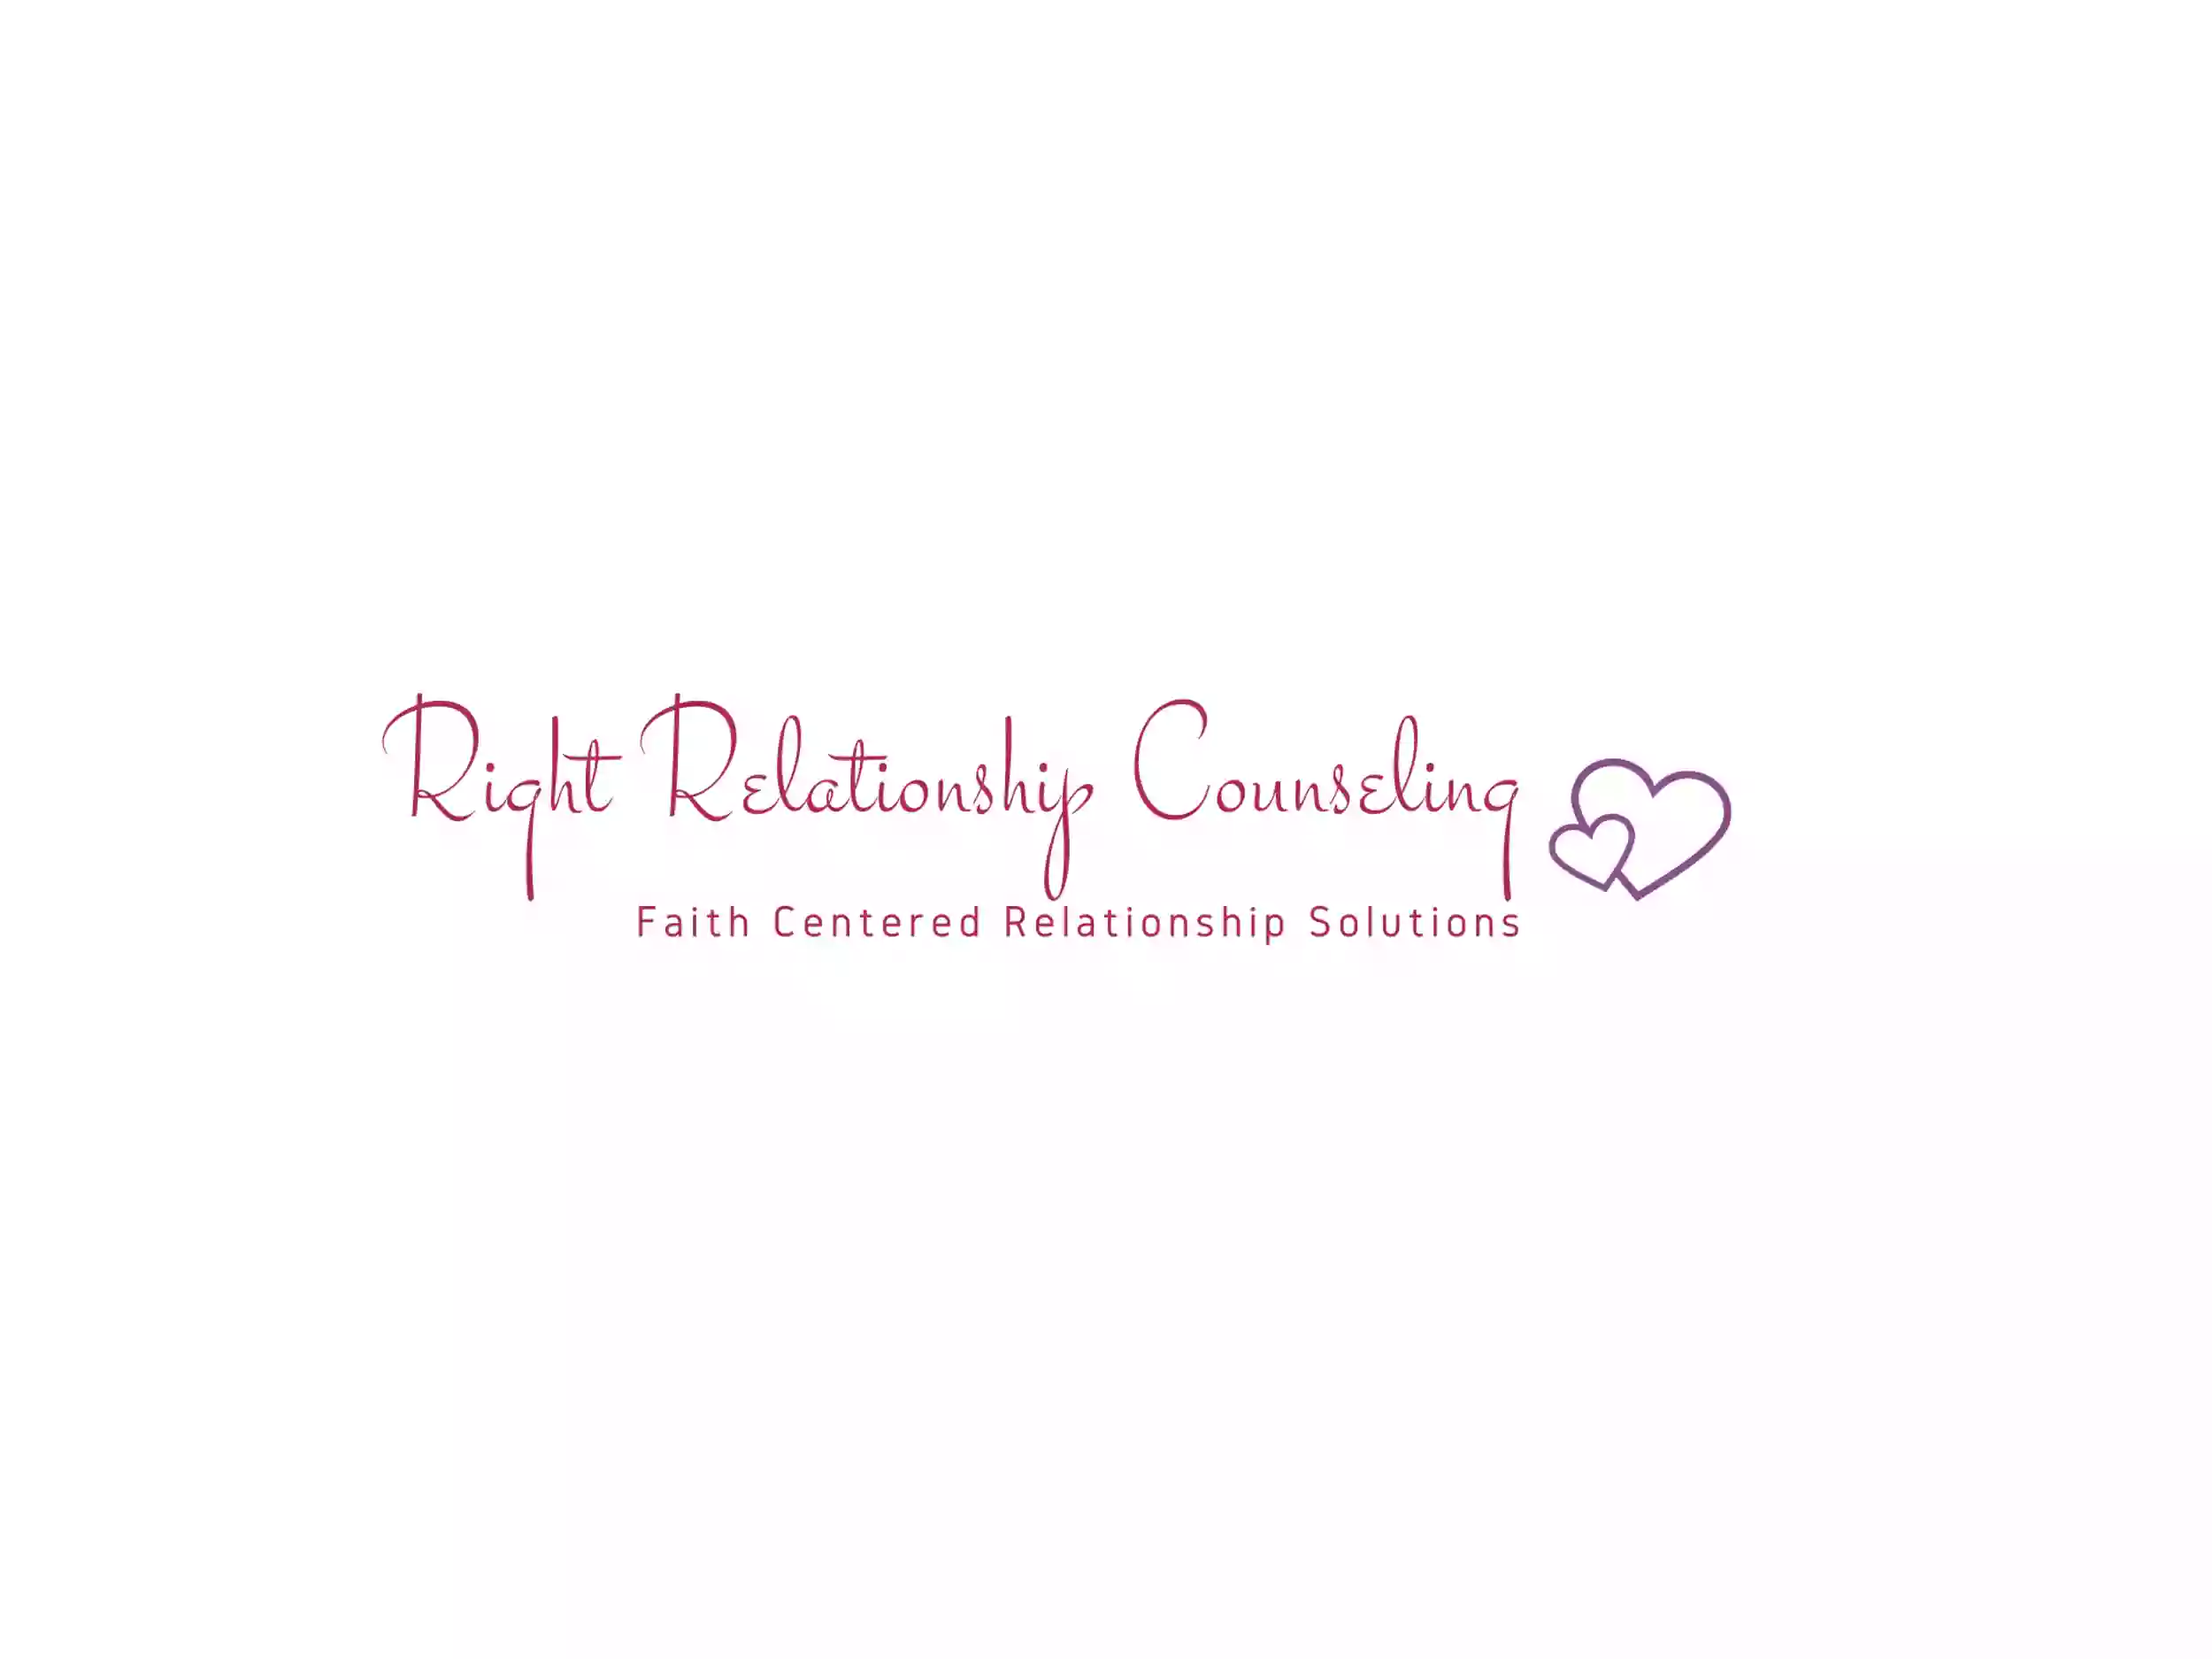 Right Relationship Counseling